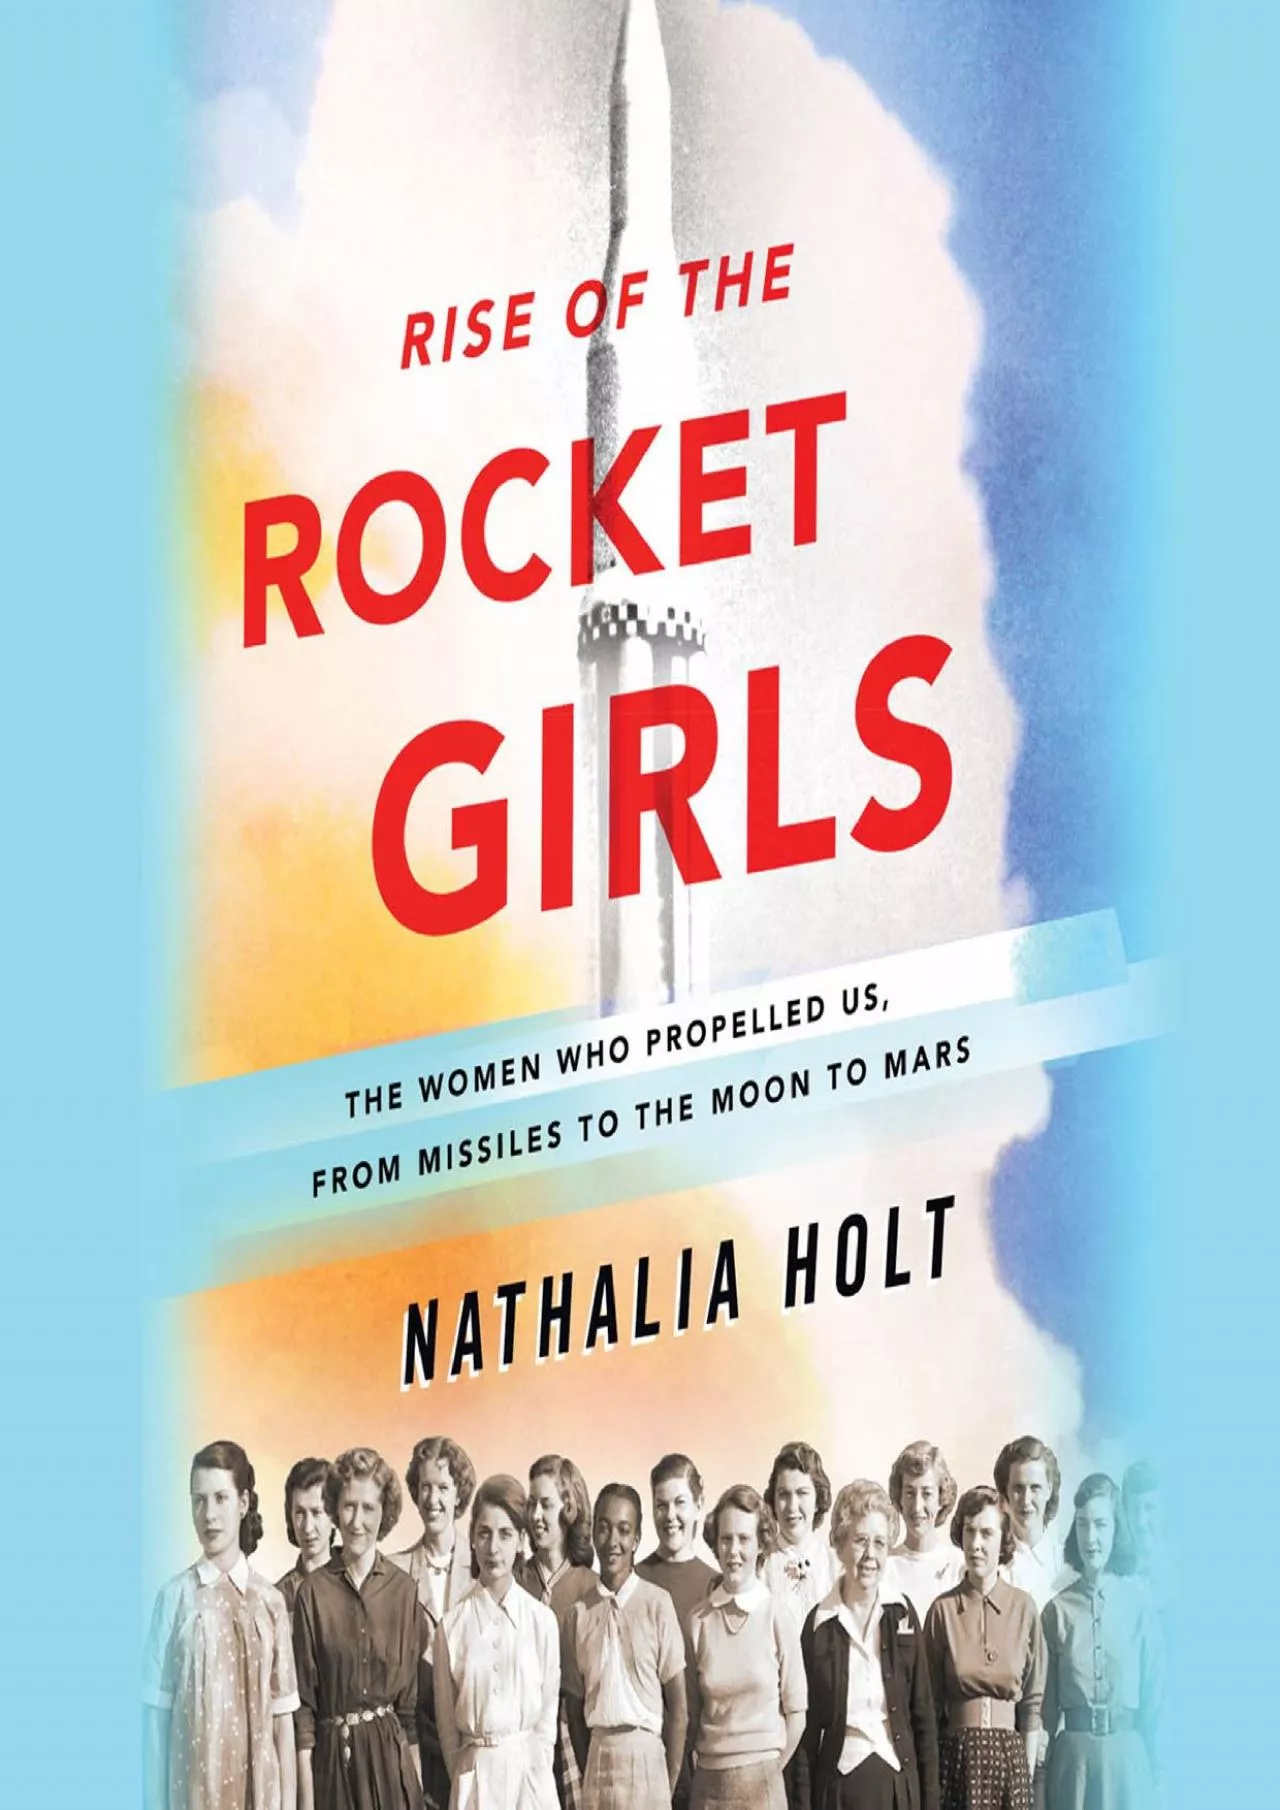 [EBOOK]-Rise of the Rocket Girls: The Women Who Propelled Us, from Missiles to the Moon